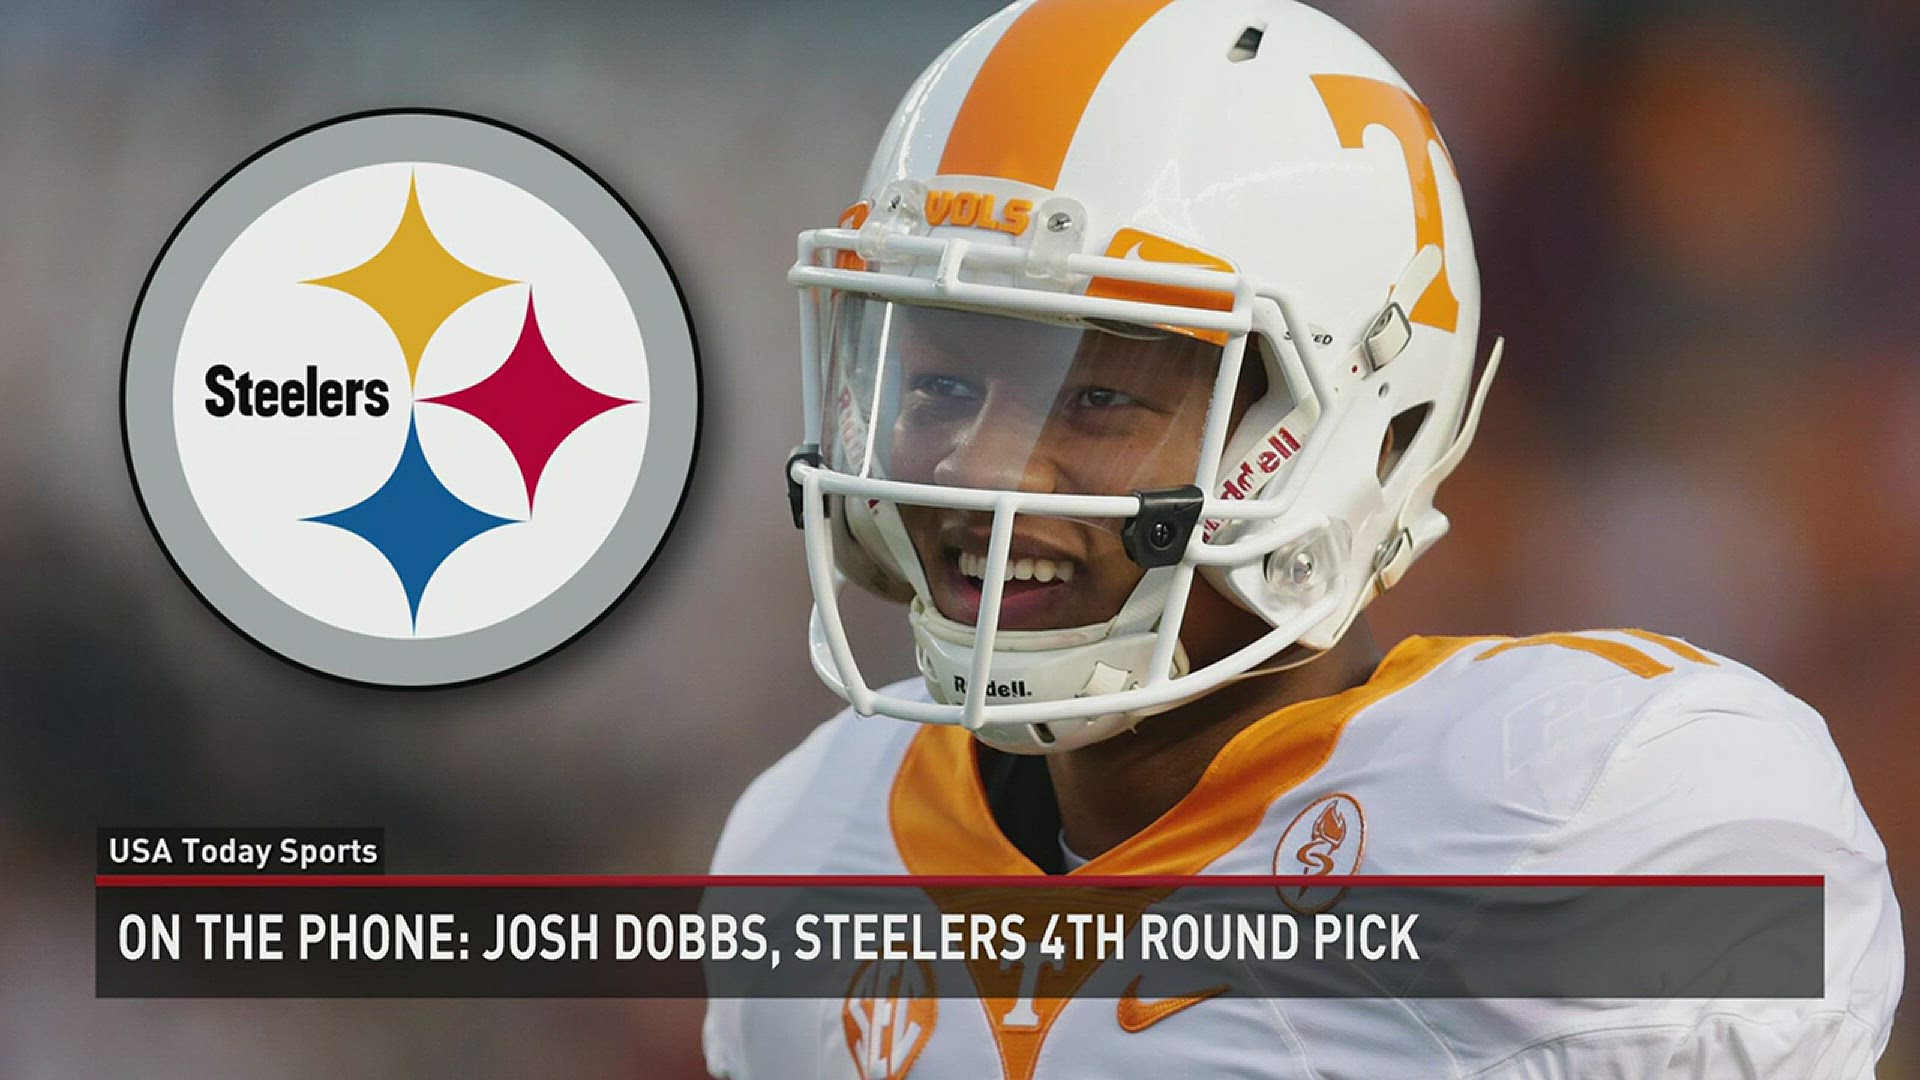 Josh Dobbs was drafted by Pittsburgh in the fourth round with the 135th pick of the 2017 NFL Draft. He was watching from his parents home in Georgia with family and friends.